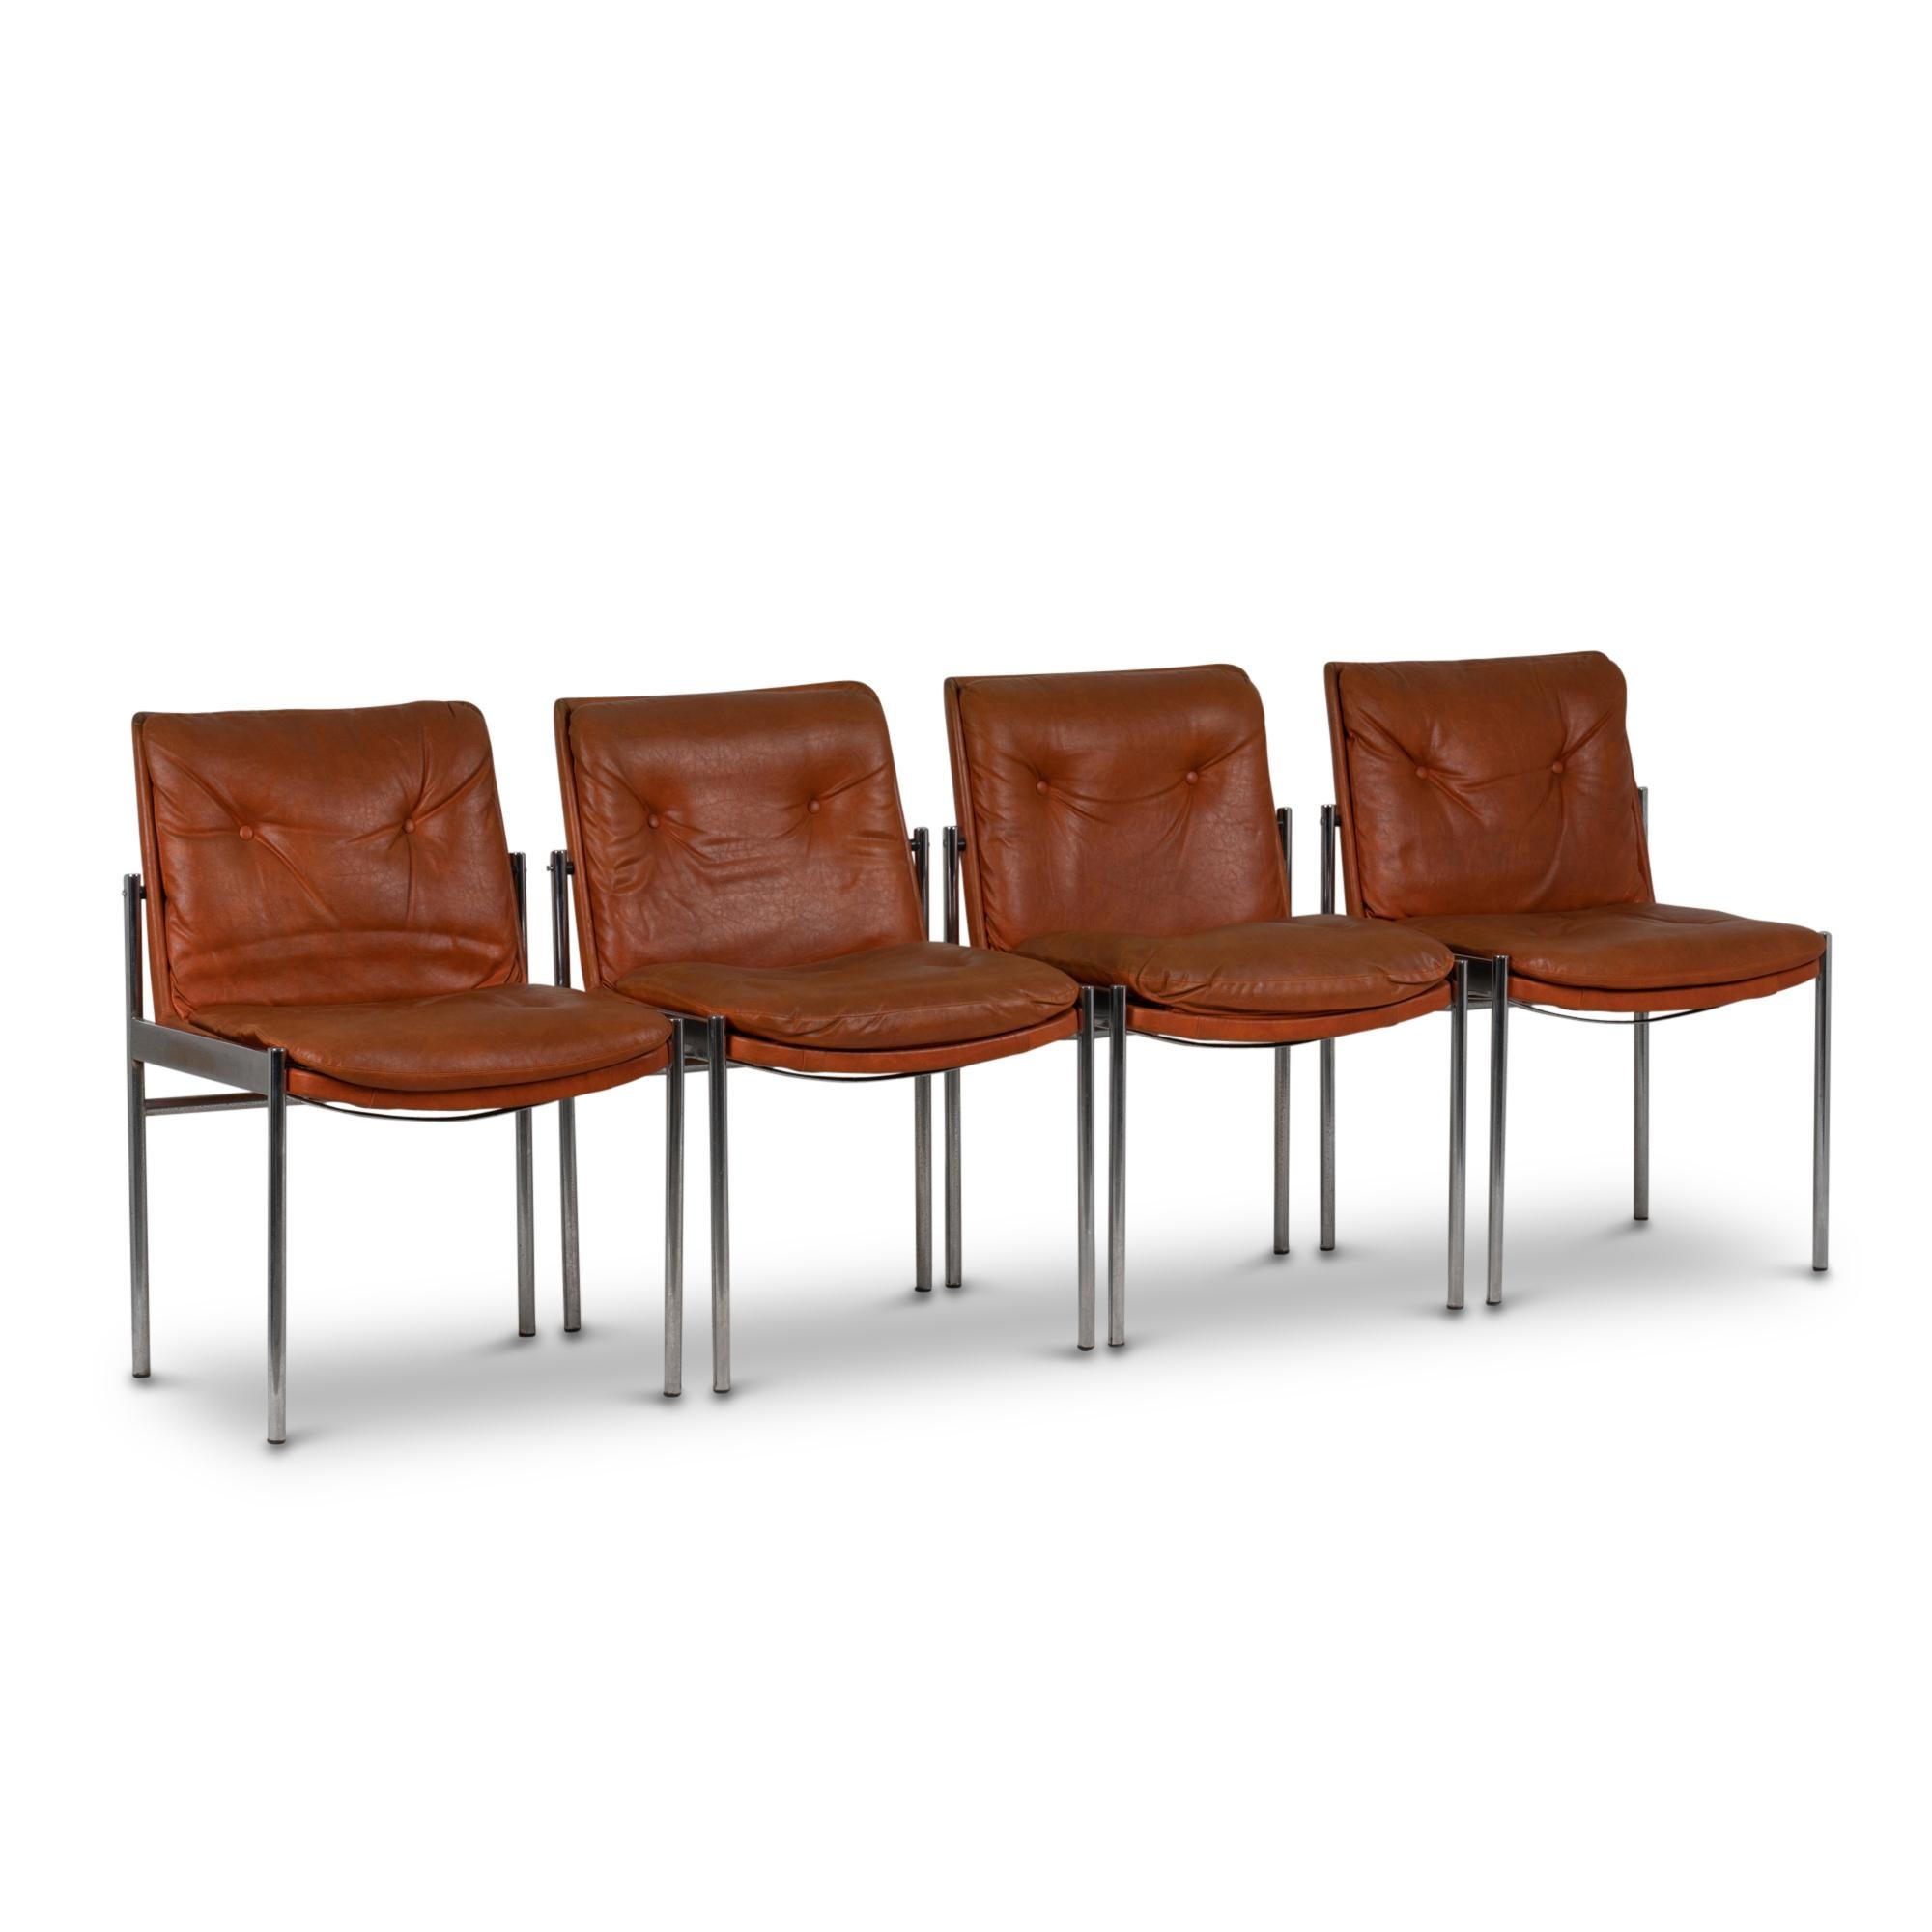 Italian Series of Twelve Chairs in Leather and Chromed Metal, 1970s For Sale